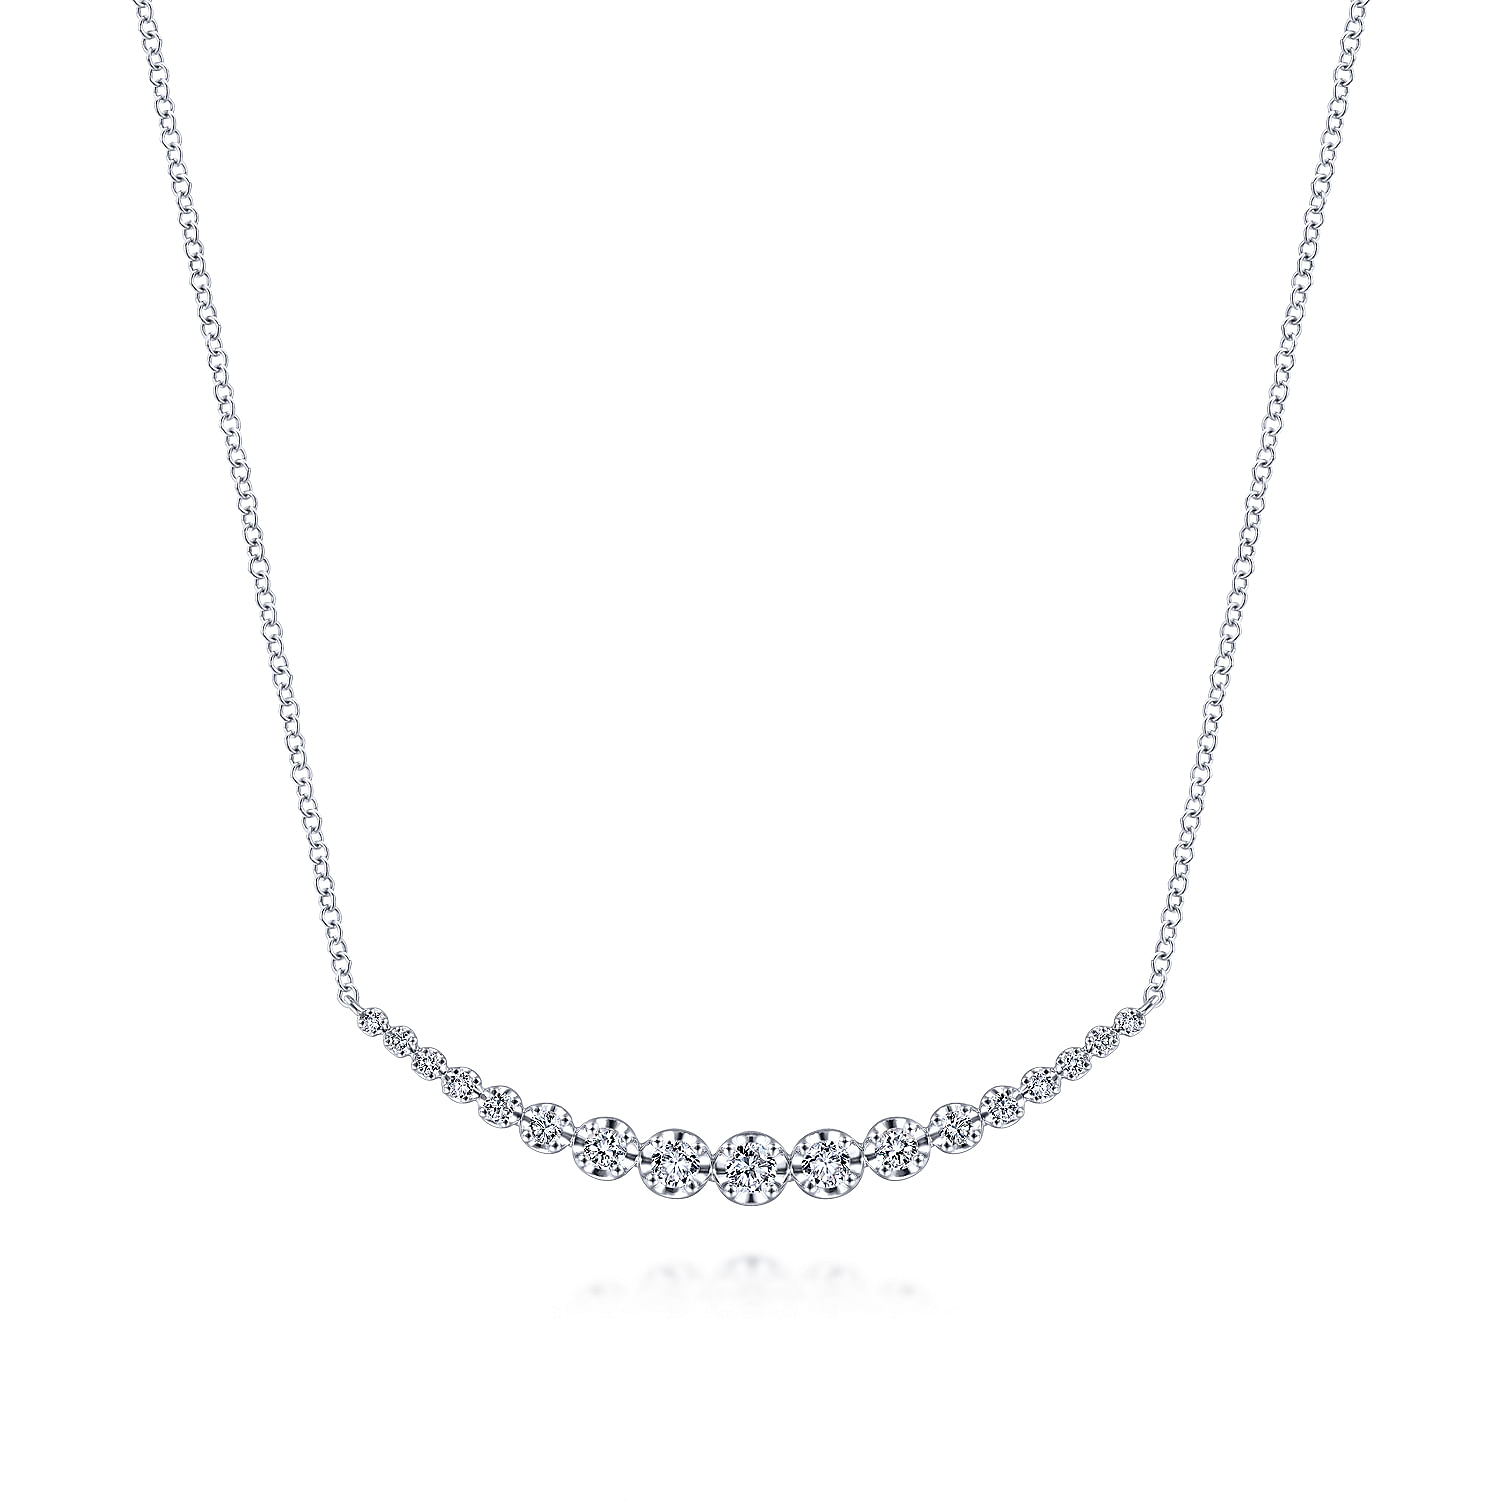 14K White Gold Buttercup Set Diamond Curved Bar Necklace